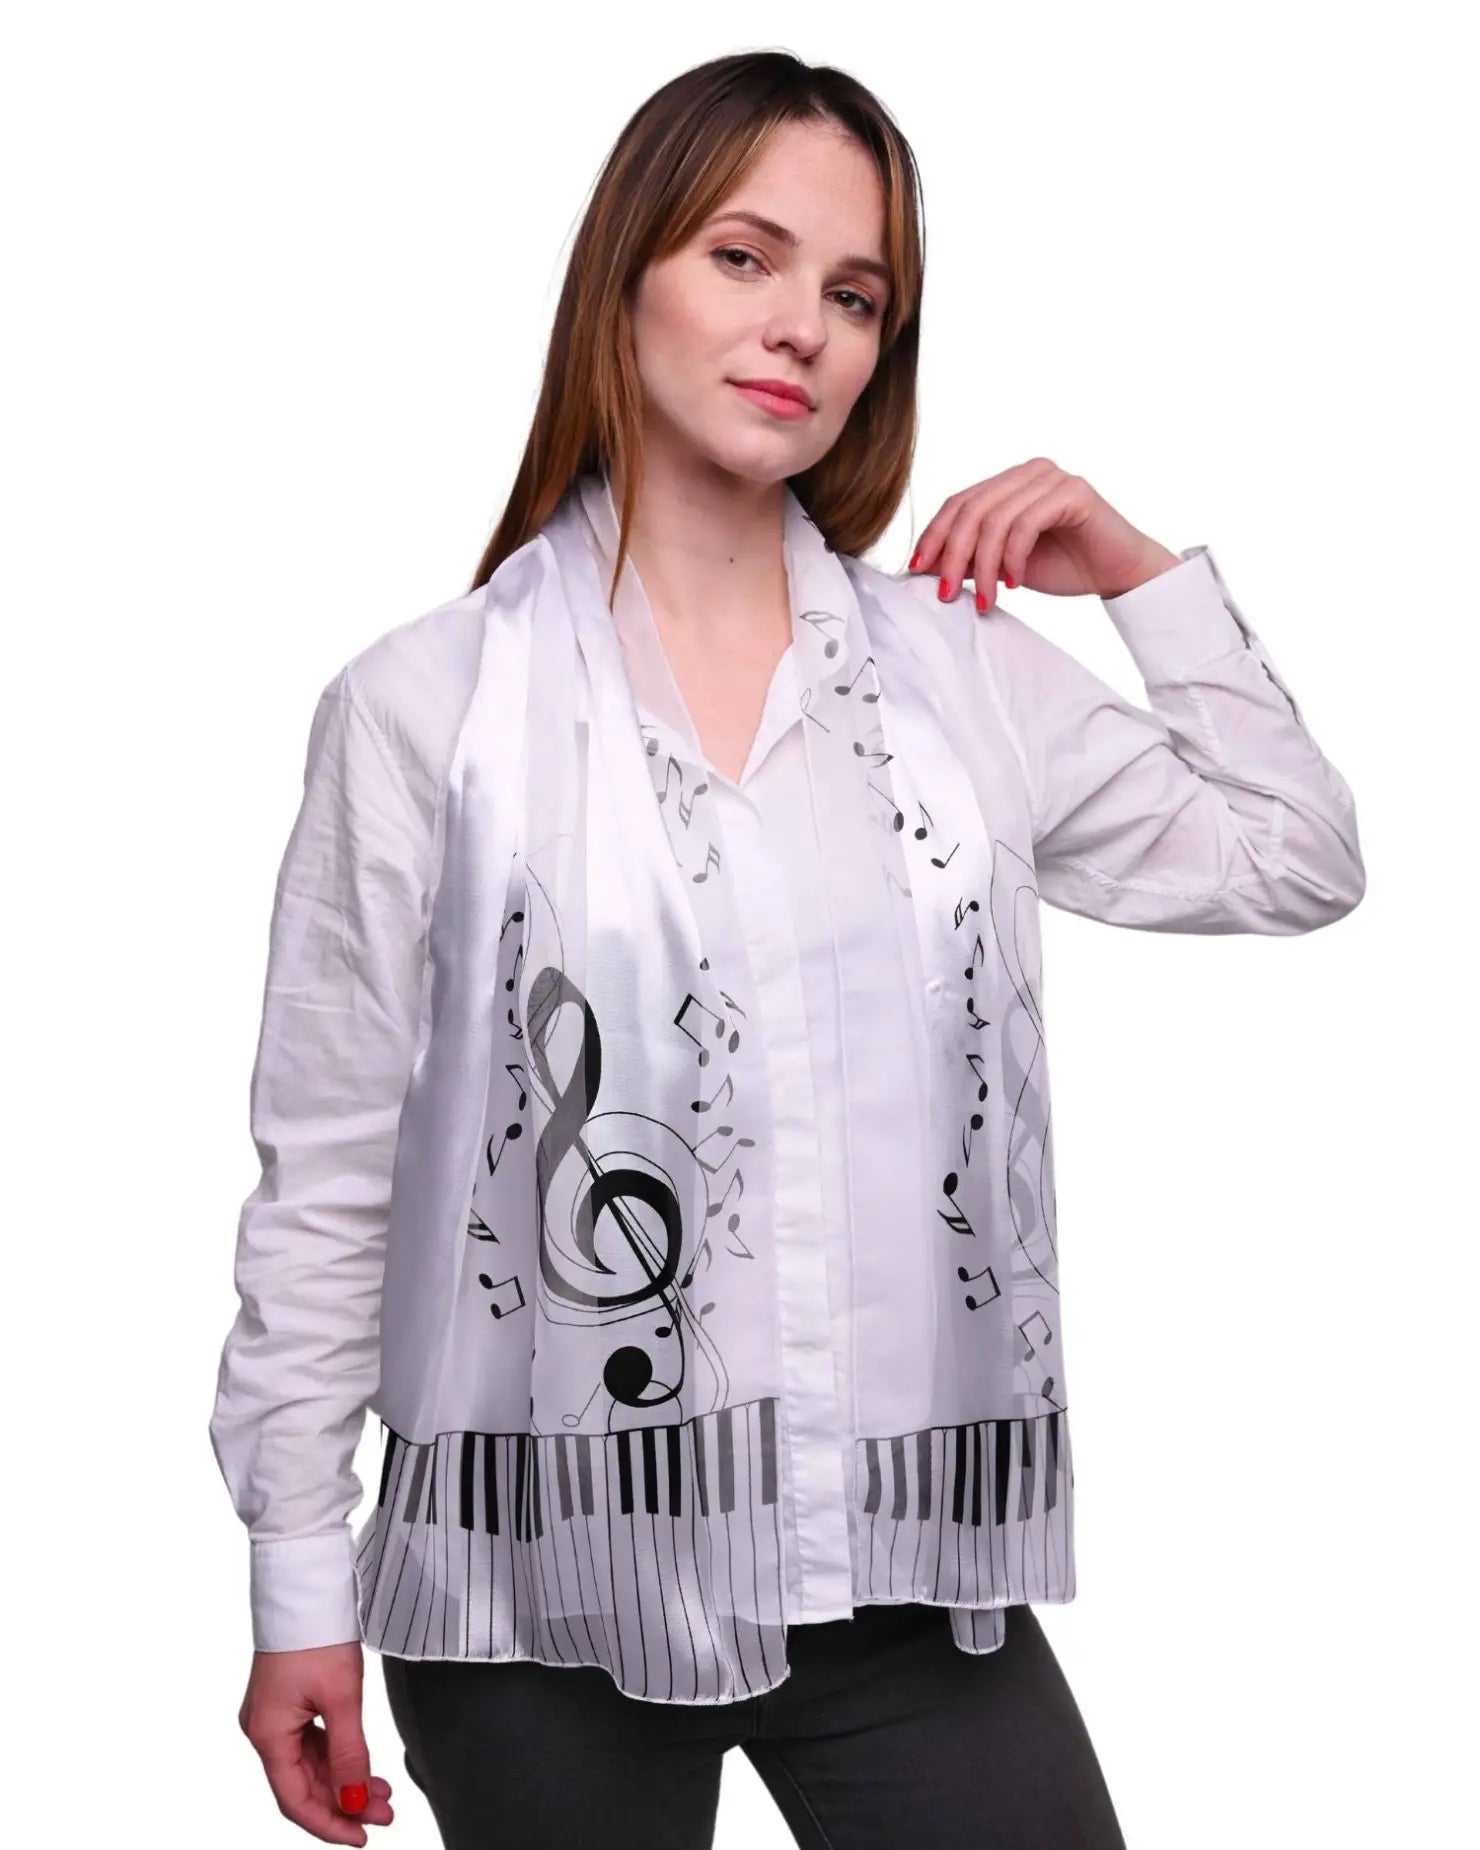 White shirt with musical notes worn by woman, from Music Satin Scarf for Unisex Piano Clef Print.